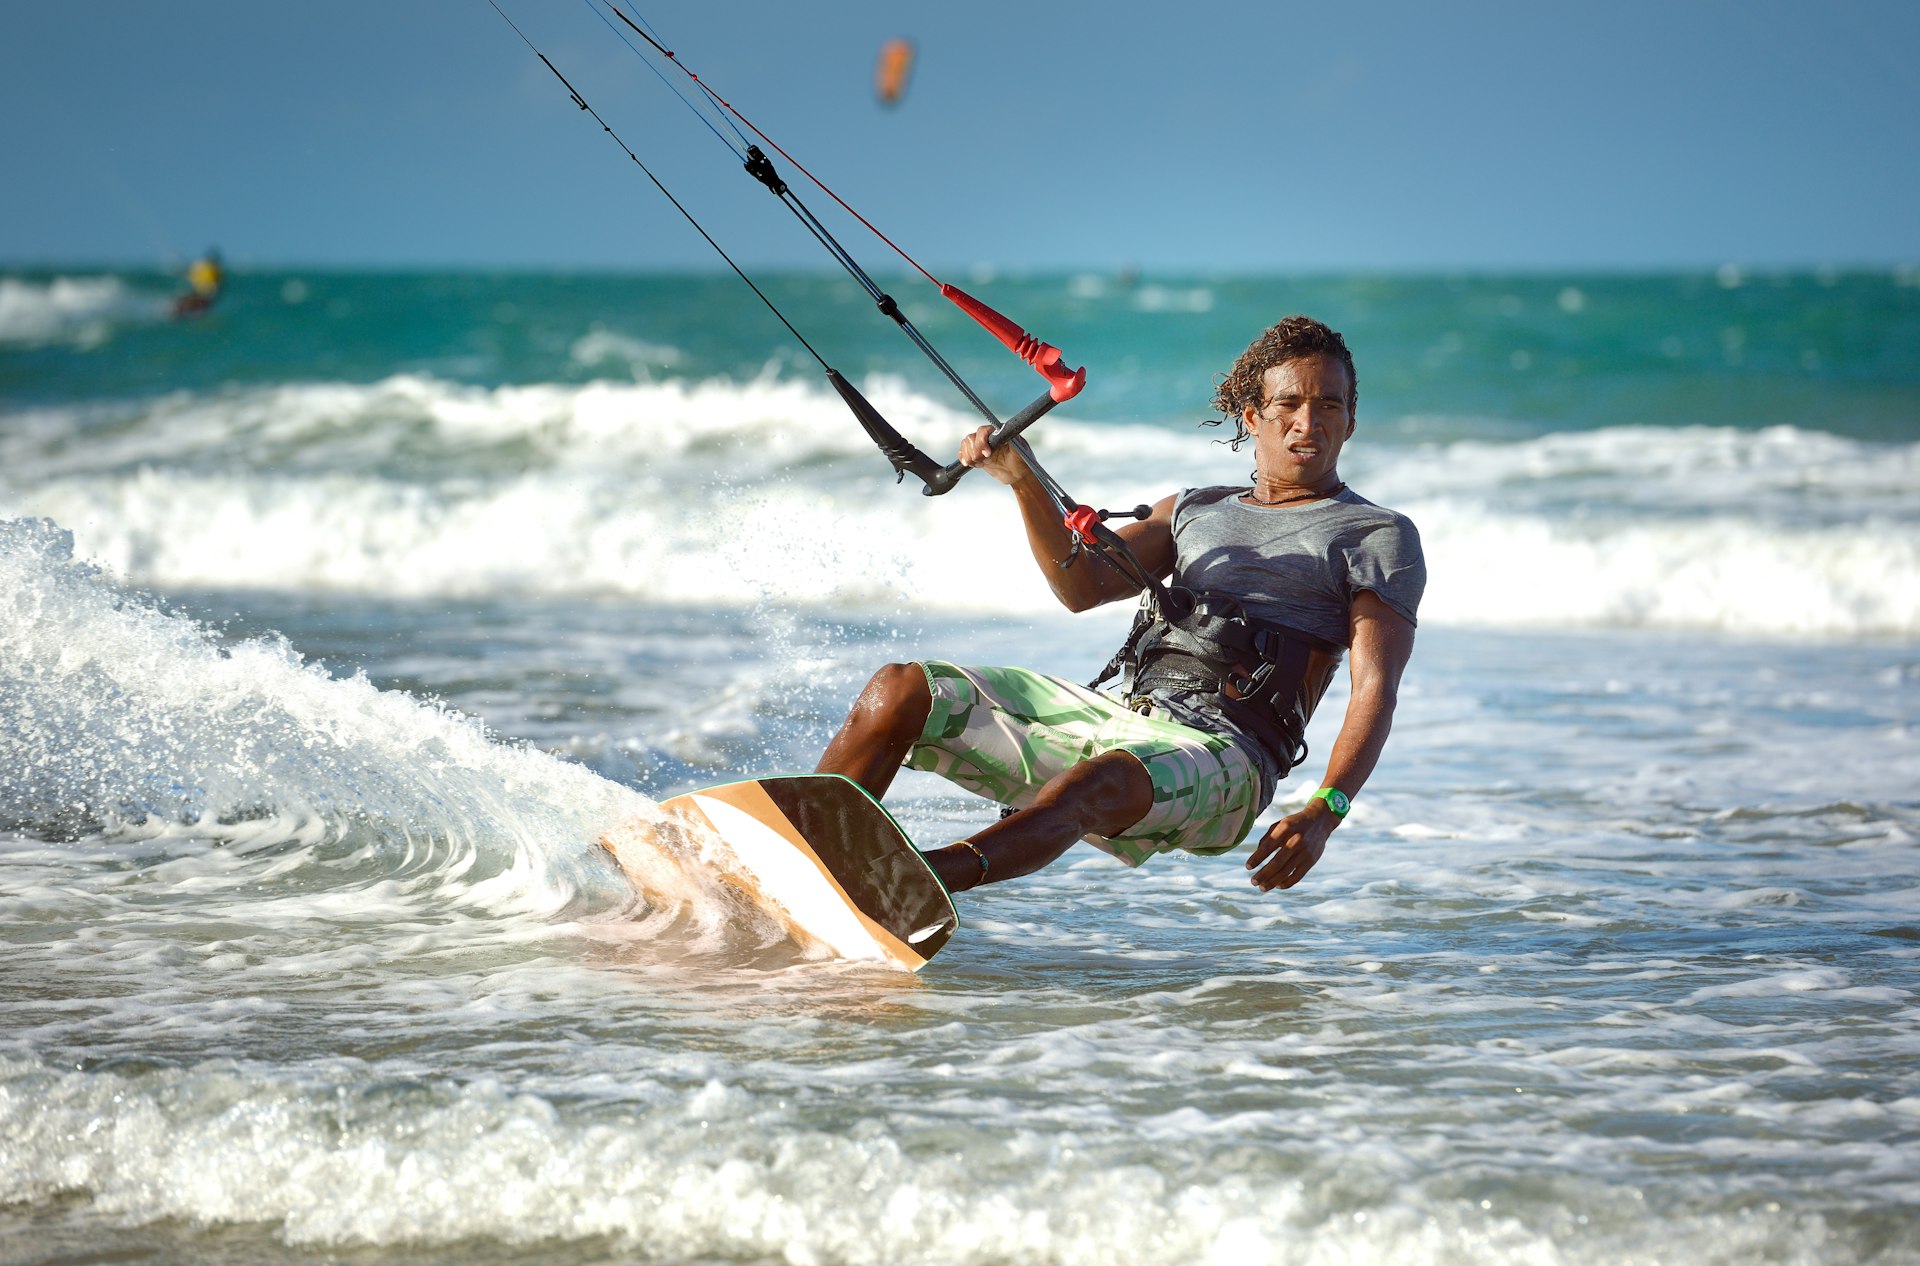 A kitesurfer glides across the shallow waters 